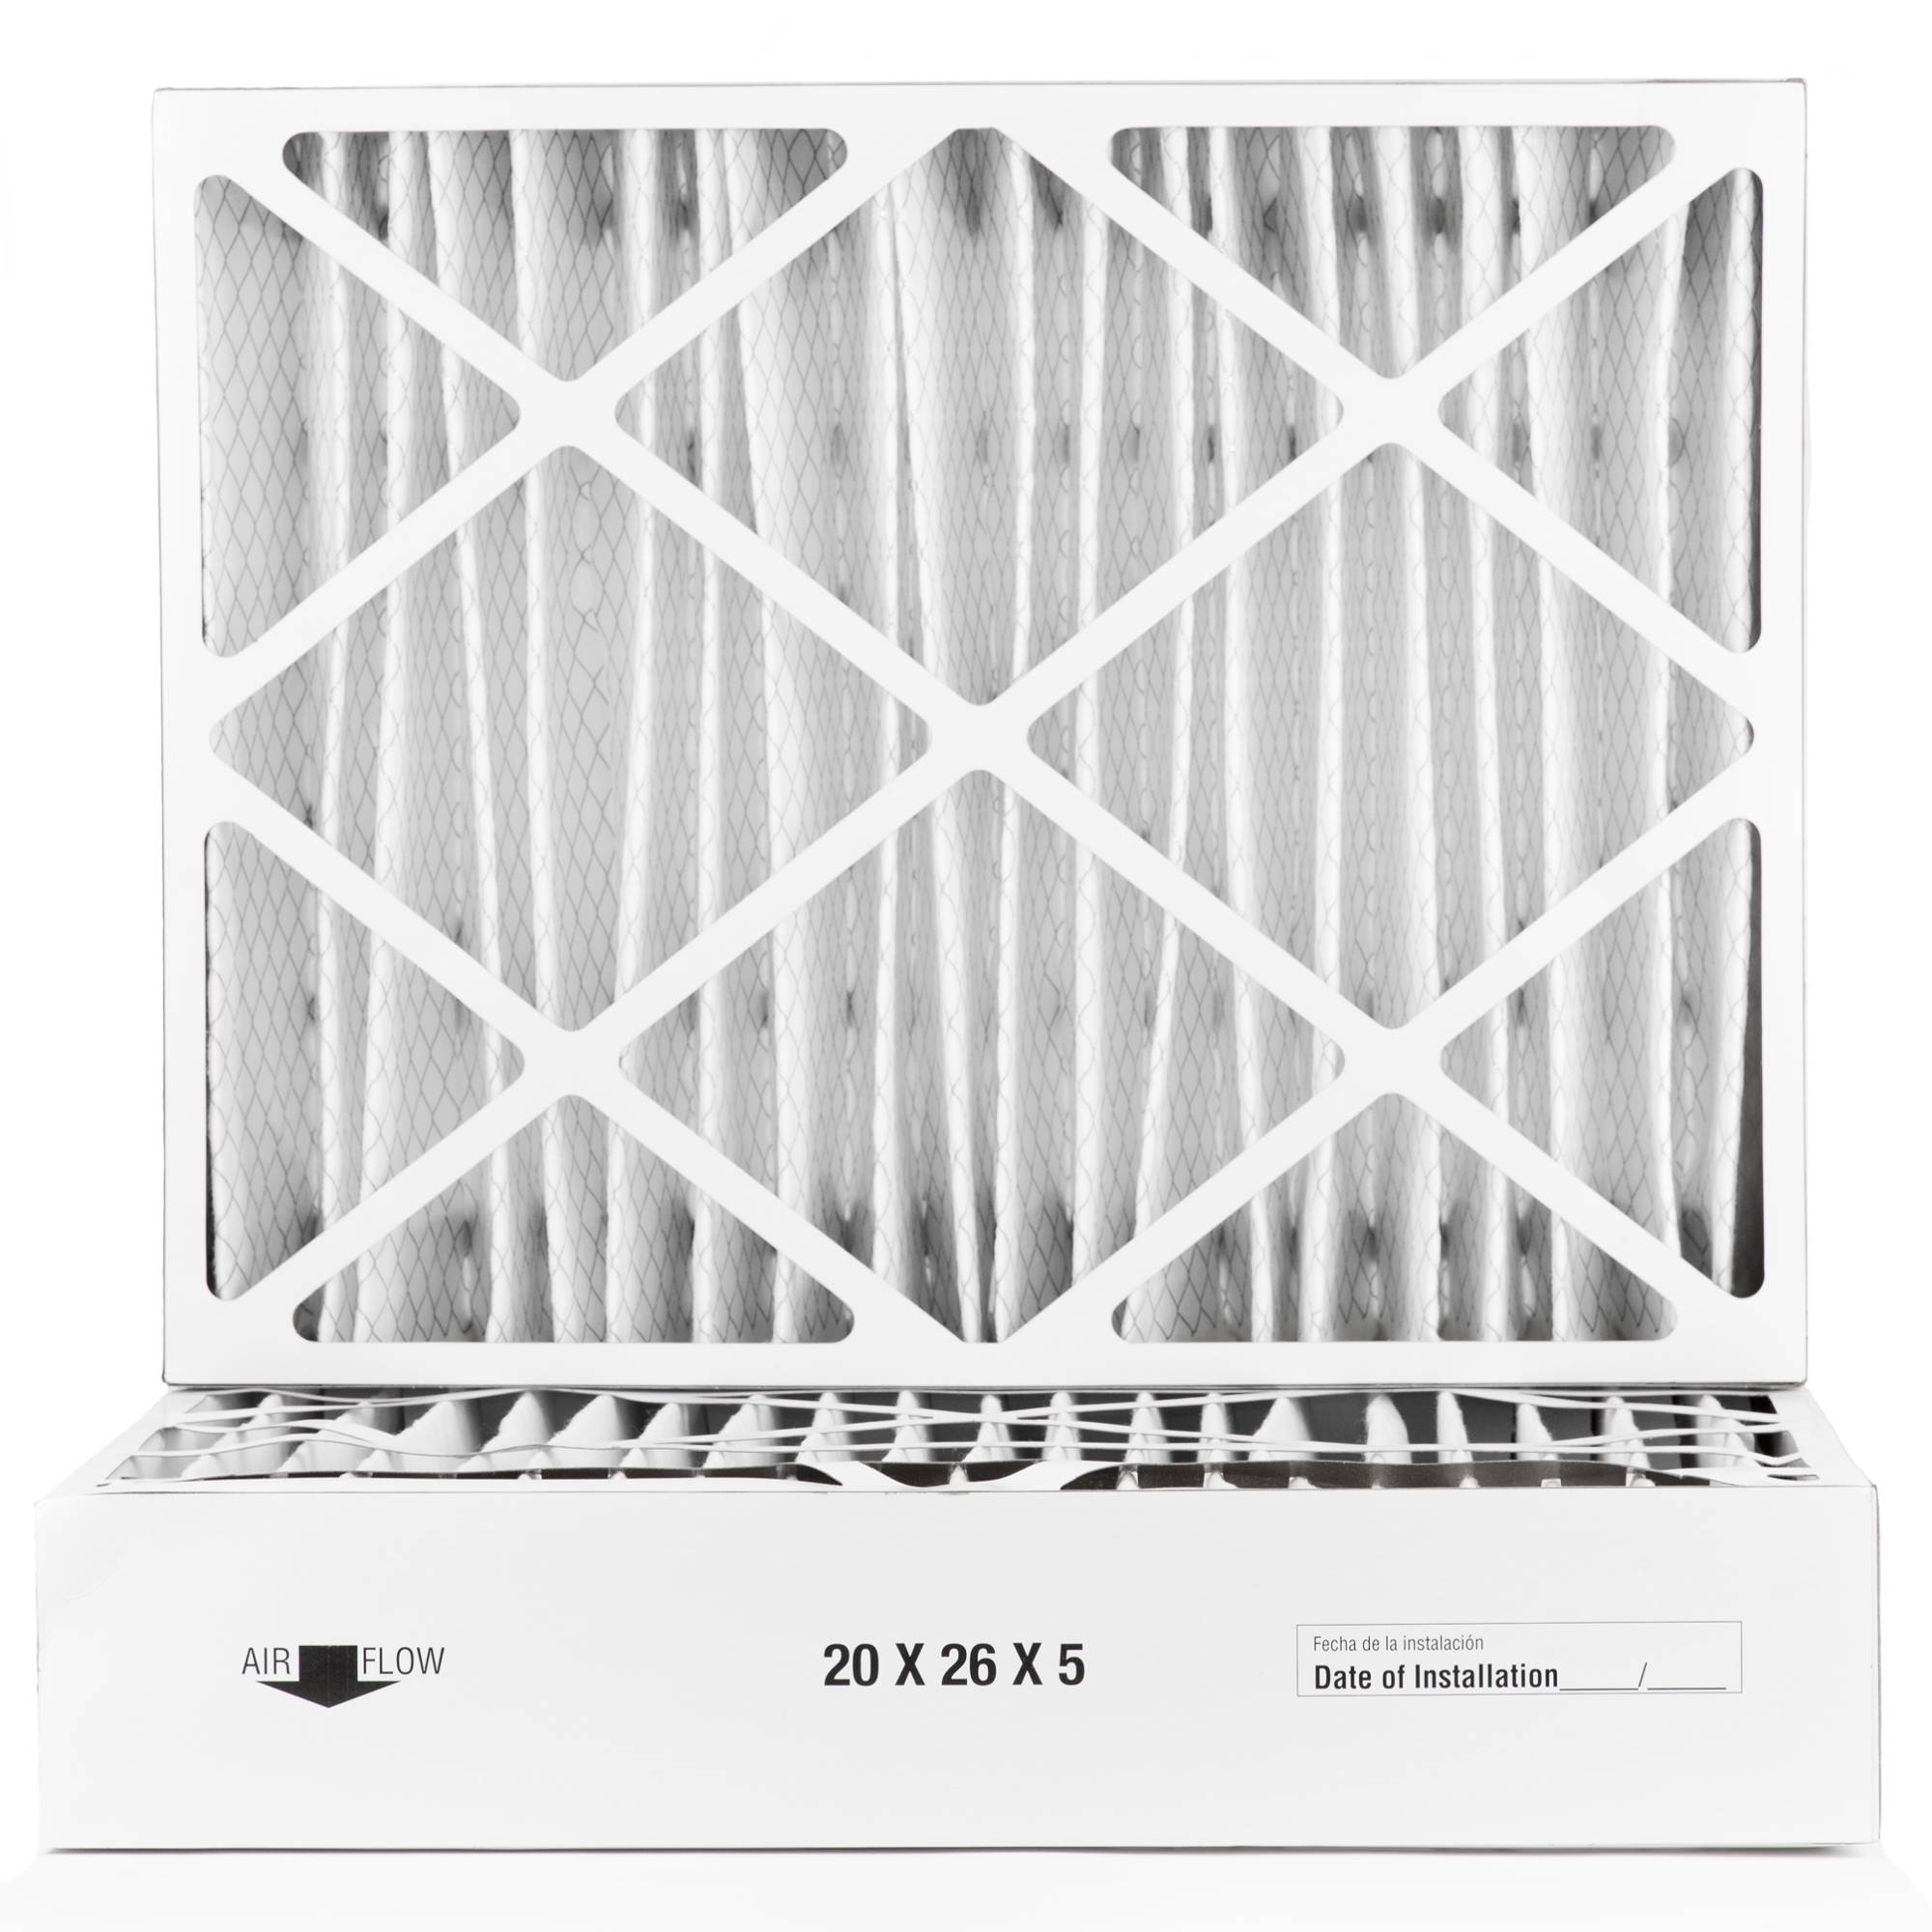 Filters Fast&reg; FFC20265WRM13 Replacement for White Rodgers DPFI20X26X5M13 MERV13, 20x26x5 - 2-Pack